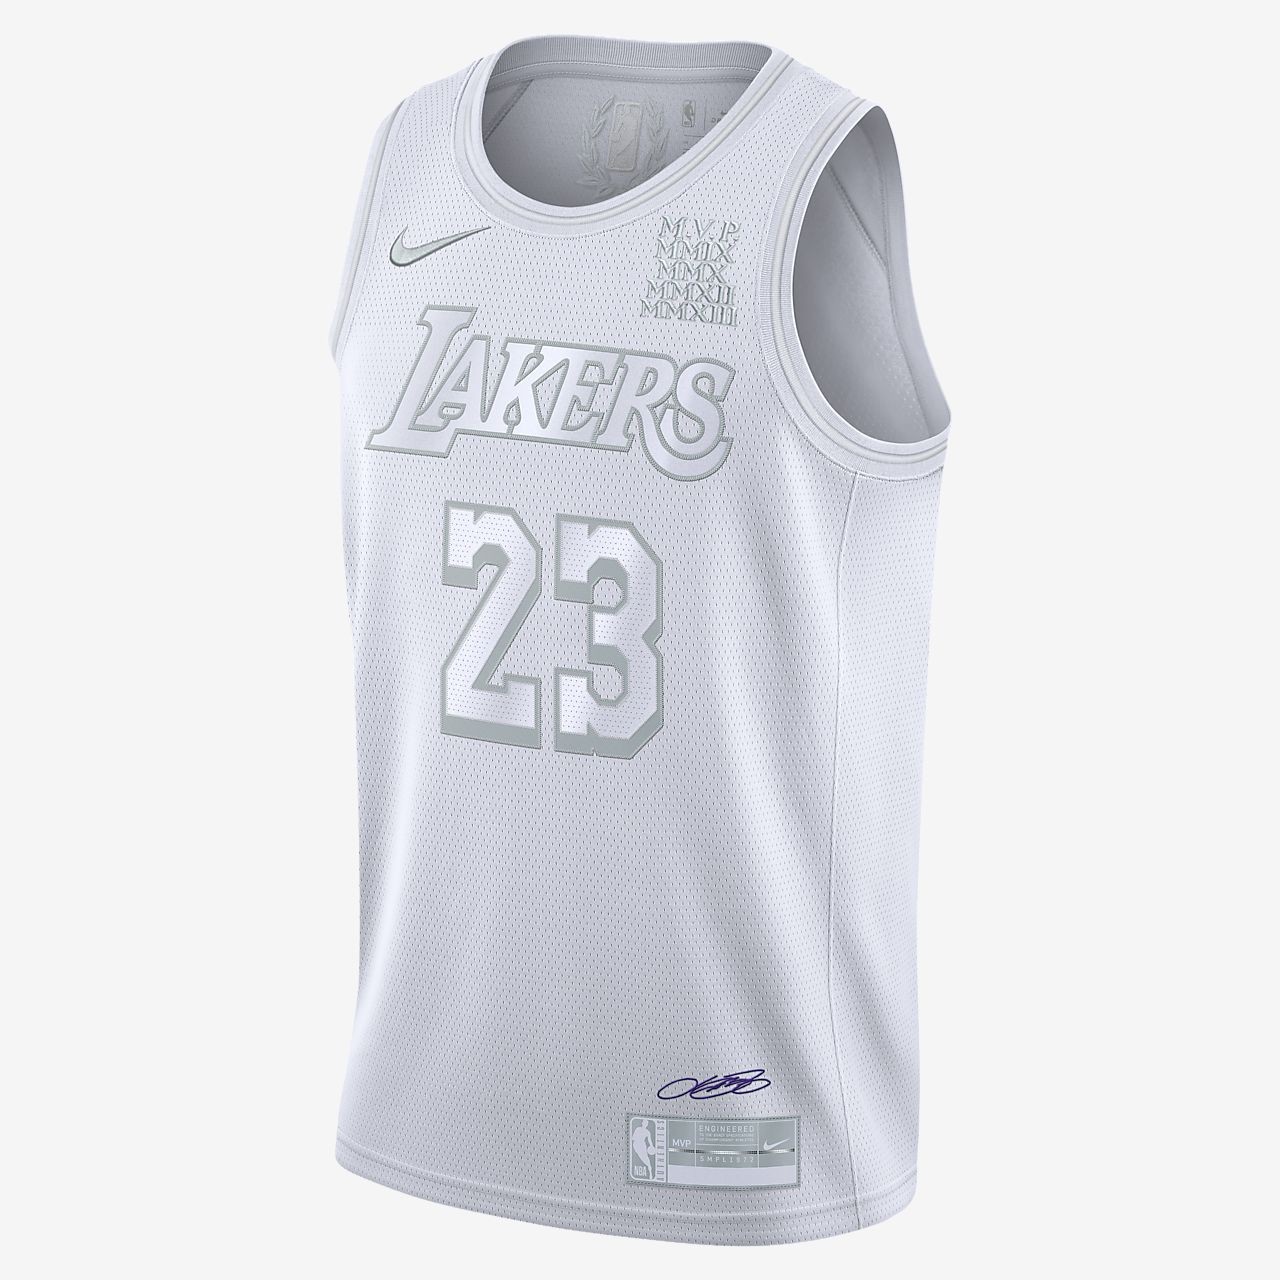 lebron james jersey for women